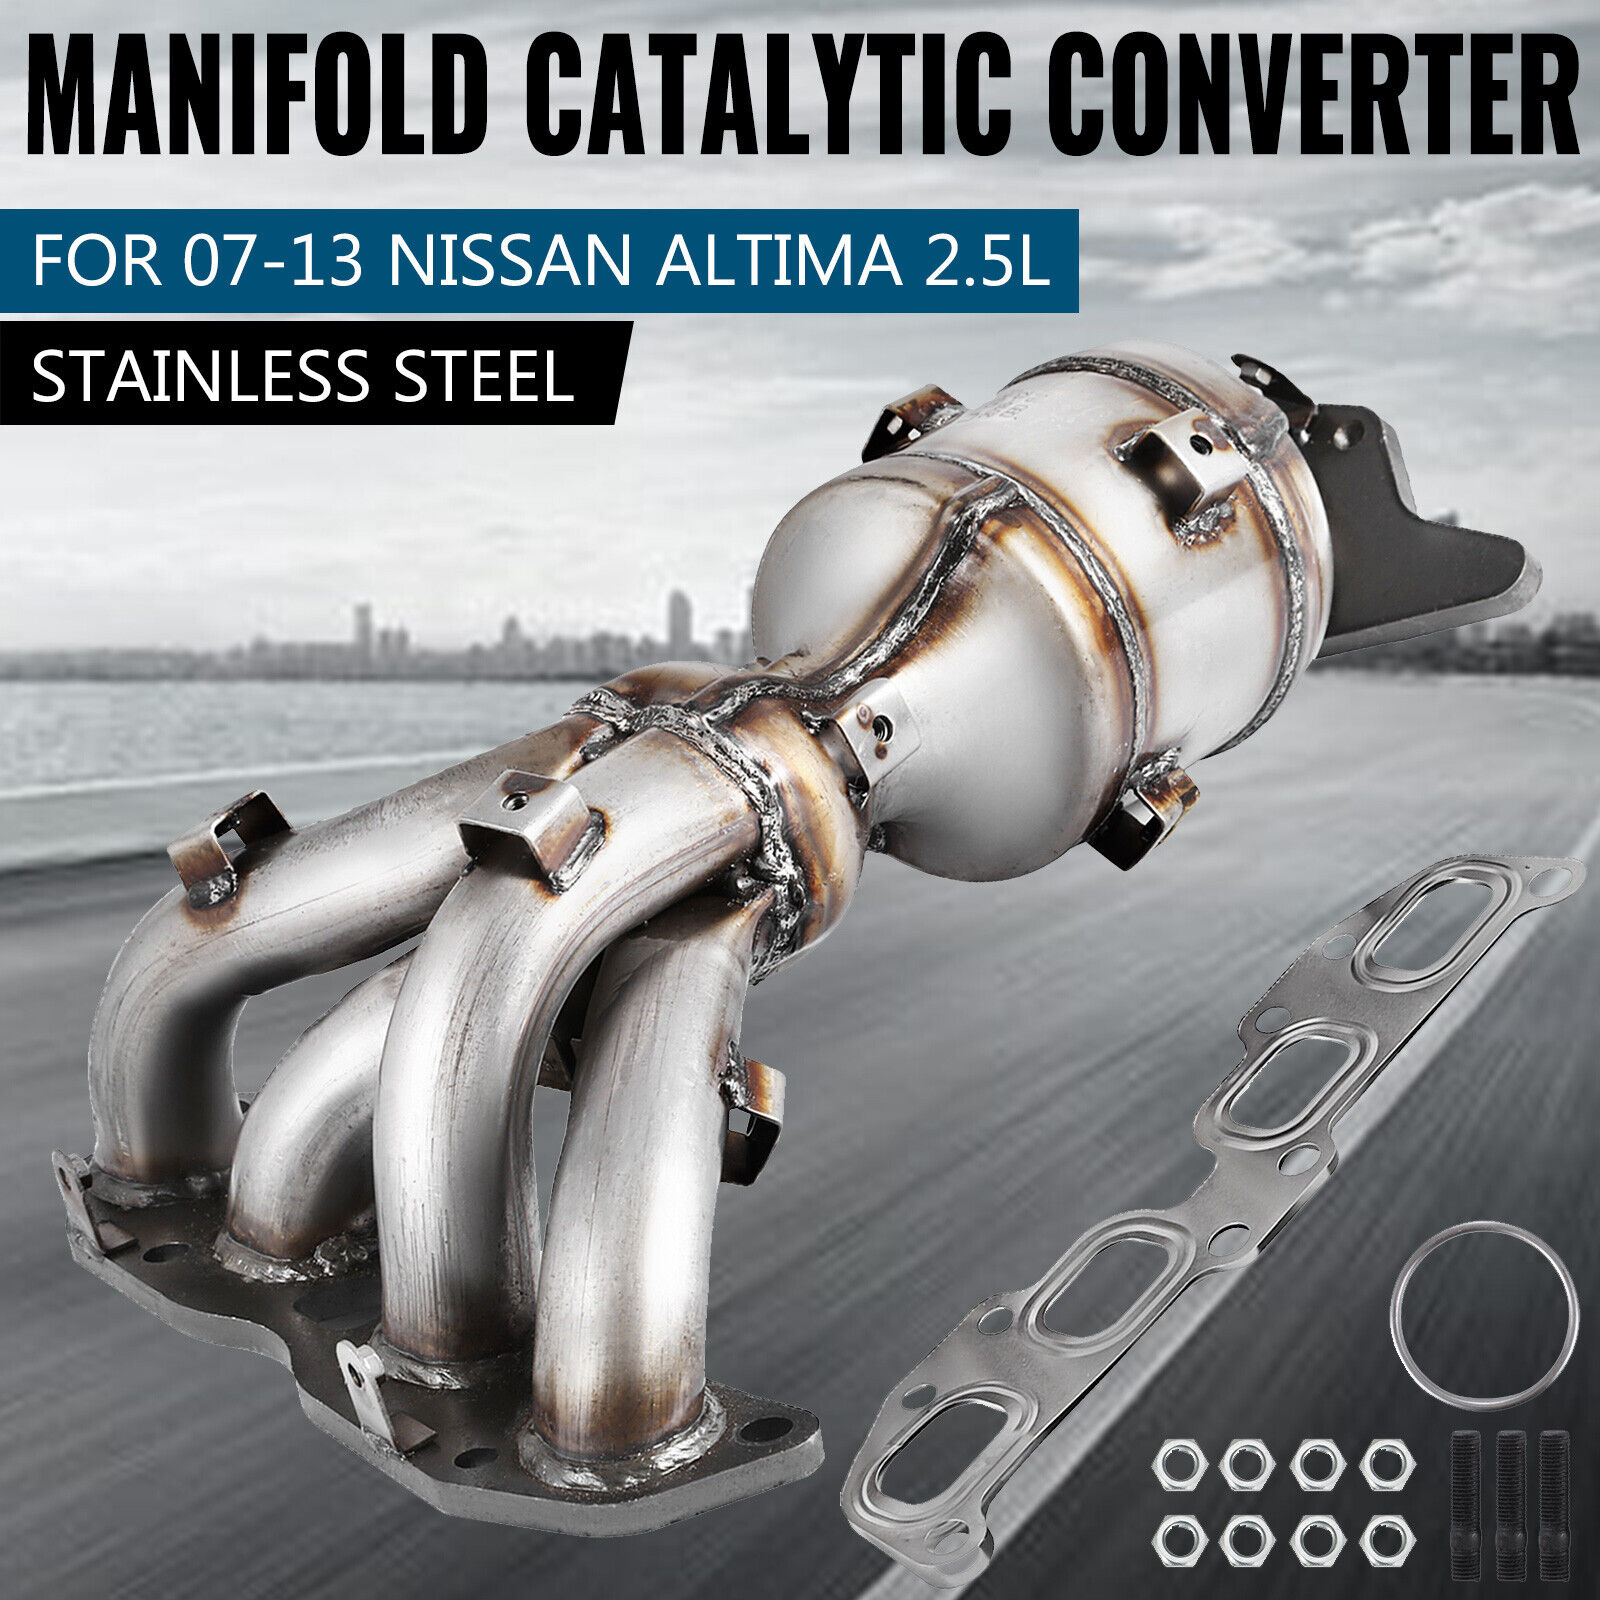 FOR 07-12 NISSAN ALTIMA 2.5L FACTORY STYLE CATALYTIC CONVERTER EXHAUST MANIFOLD